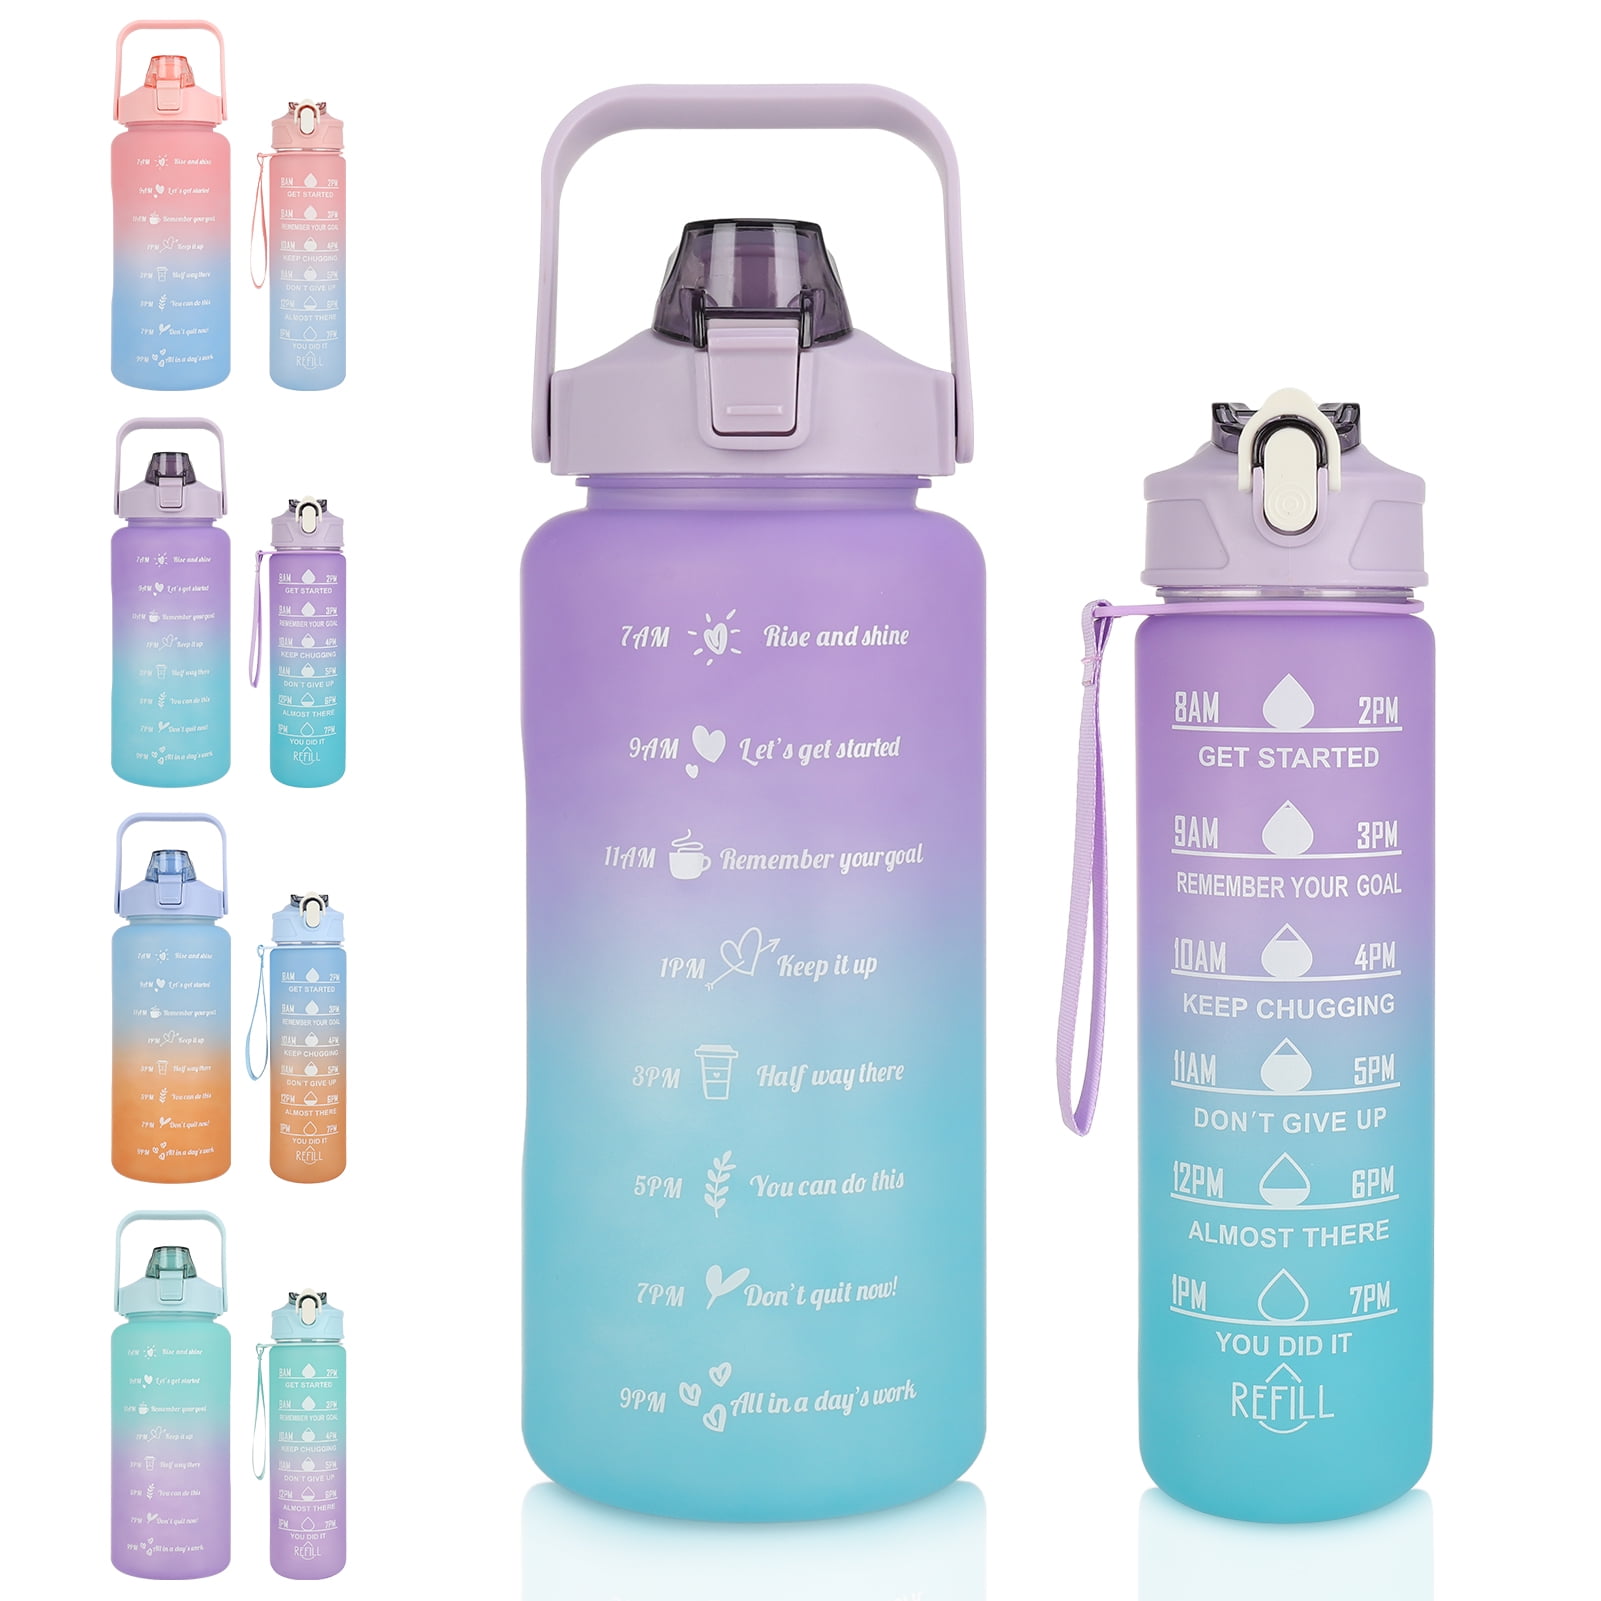 32 oz Sports Water Bottle with Straw Motivational Time Marker Leakproof BPA Free, Purple